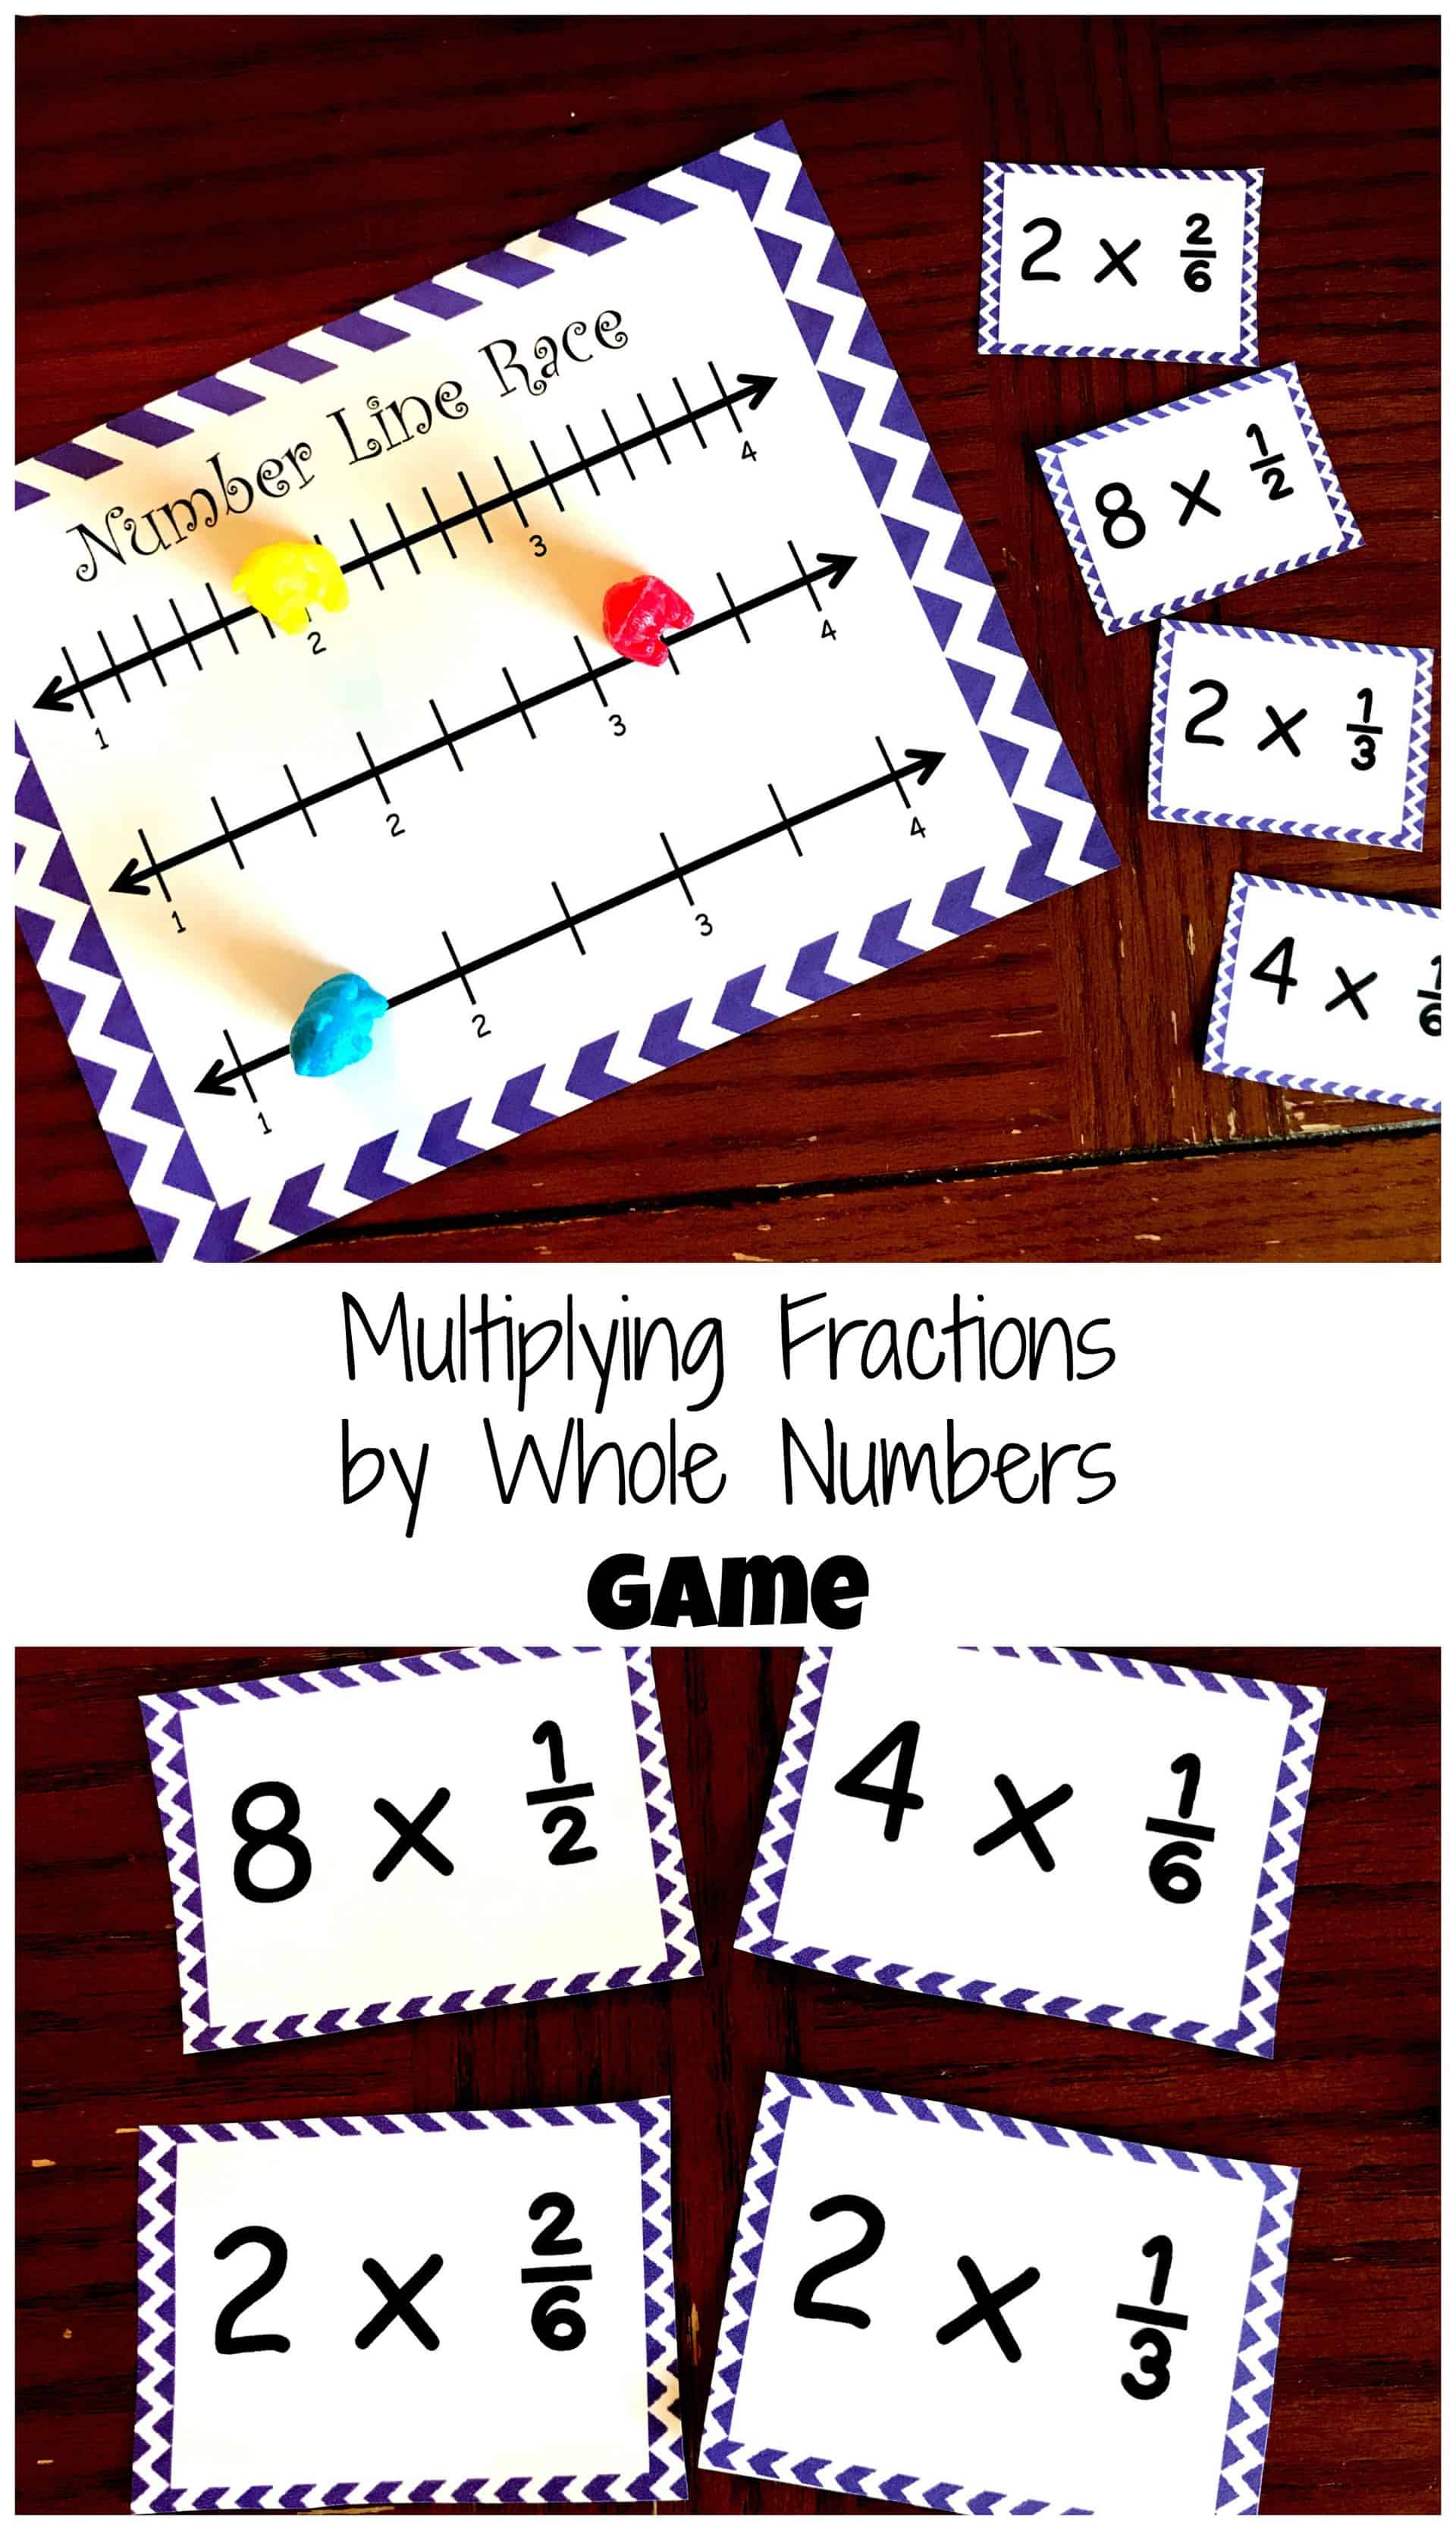 Fractions on a number line game card with game pieces and multiplication cards.